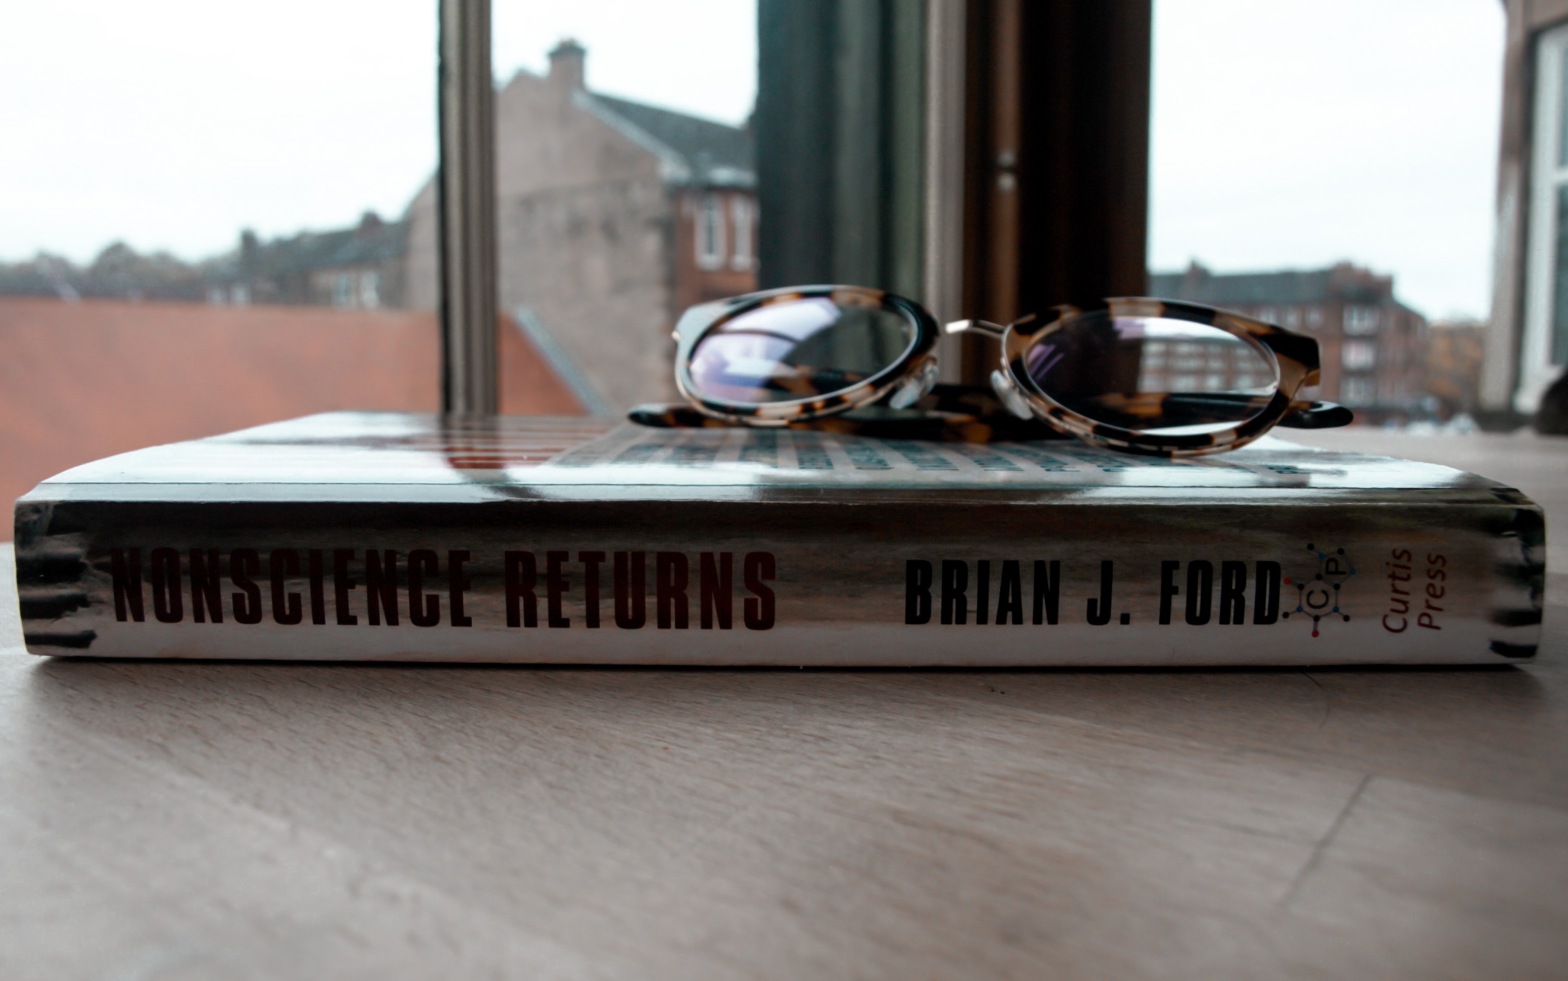 Photo of the spine of Nonscience Returns by Brian J Ford